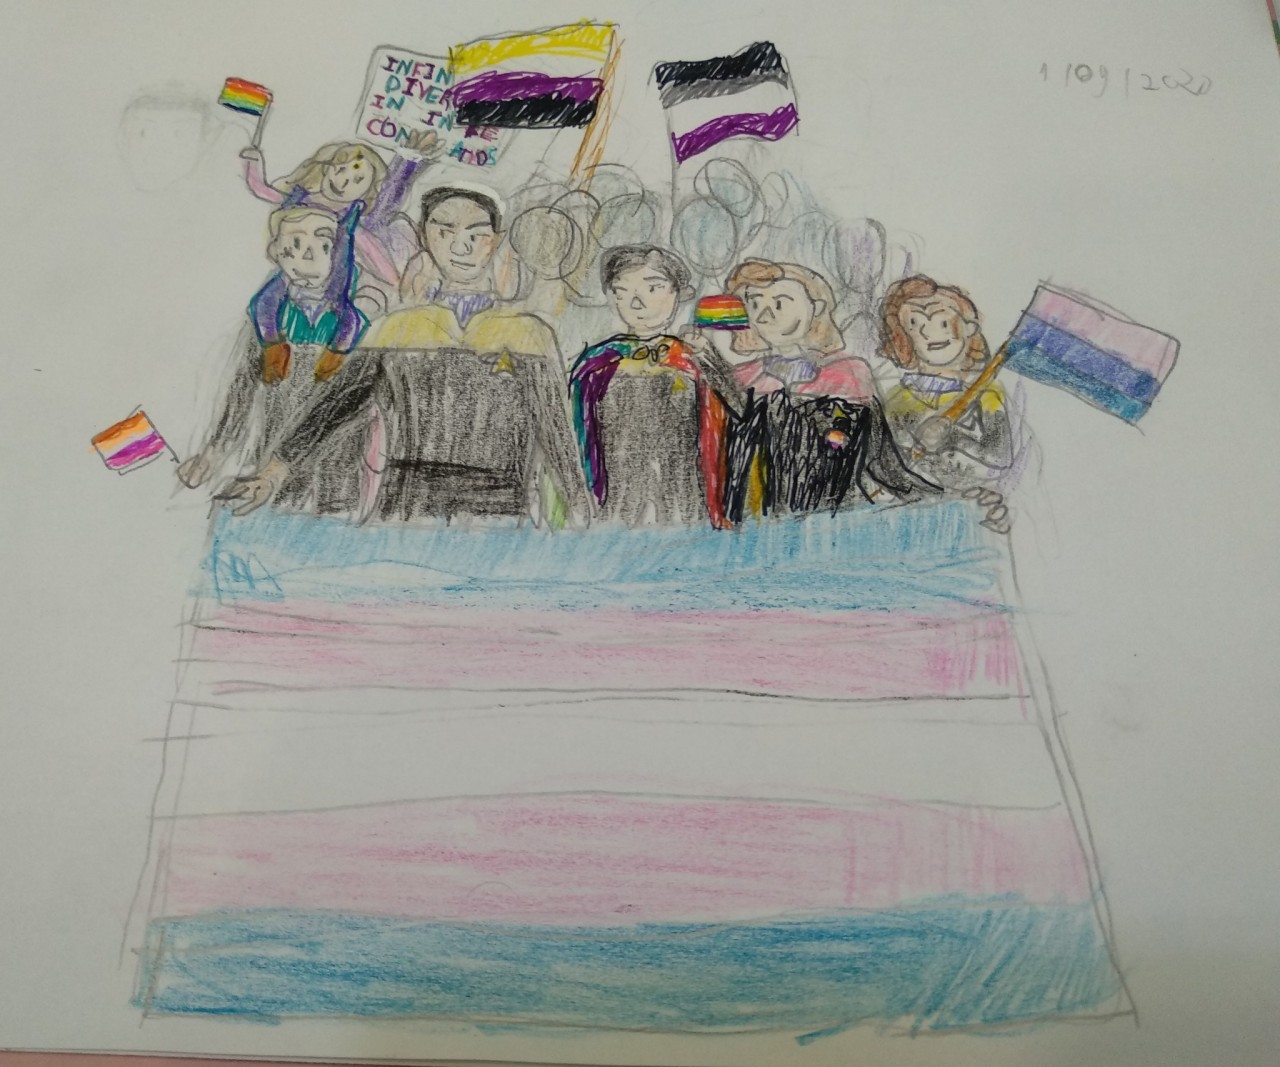 a drawing made with colored pencils and markers. In it, characters from the TV show Star Trek: Voyager are standing behind a big trans pride flag carried by Tuvok and Janeway, who has a lesbian pin. Between them stands Harry Kim waving a small rainbow flag, with another tied around his shoulders like a cape. To Janeway’s right stands B’elanna holding a medium sized bisexual pride flag. To Tuvok’s left stands Seven,  in a uniform, holding a lesbian flag. Namoi Wildman is sitting on her shoulders and raising a small rainbow flag. There is a crowd behind these chracters, raising nonbinary and asexual pride flags as well as a sign that reads “Infinite diversity in infinite combinations.“